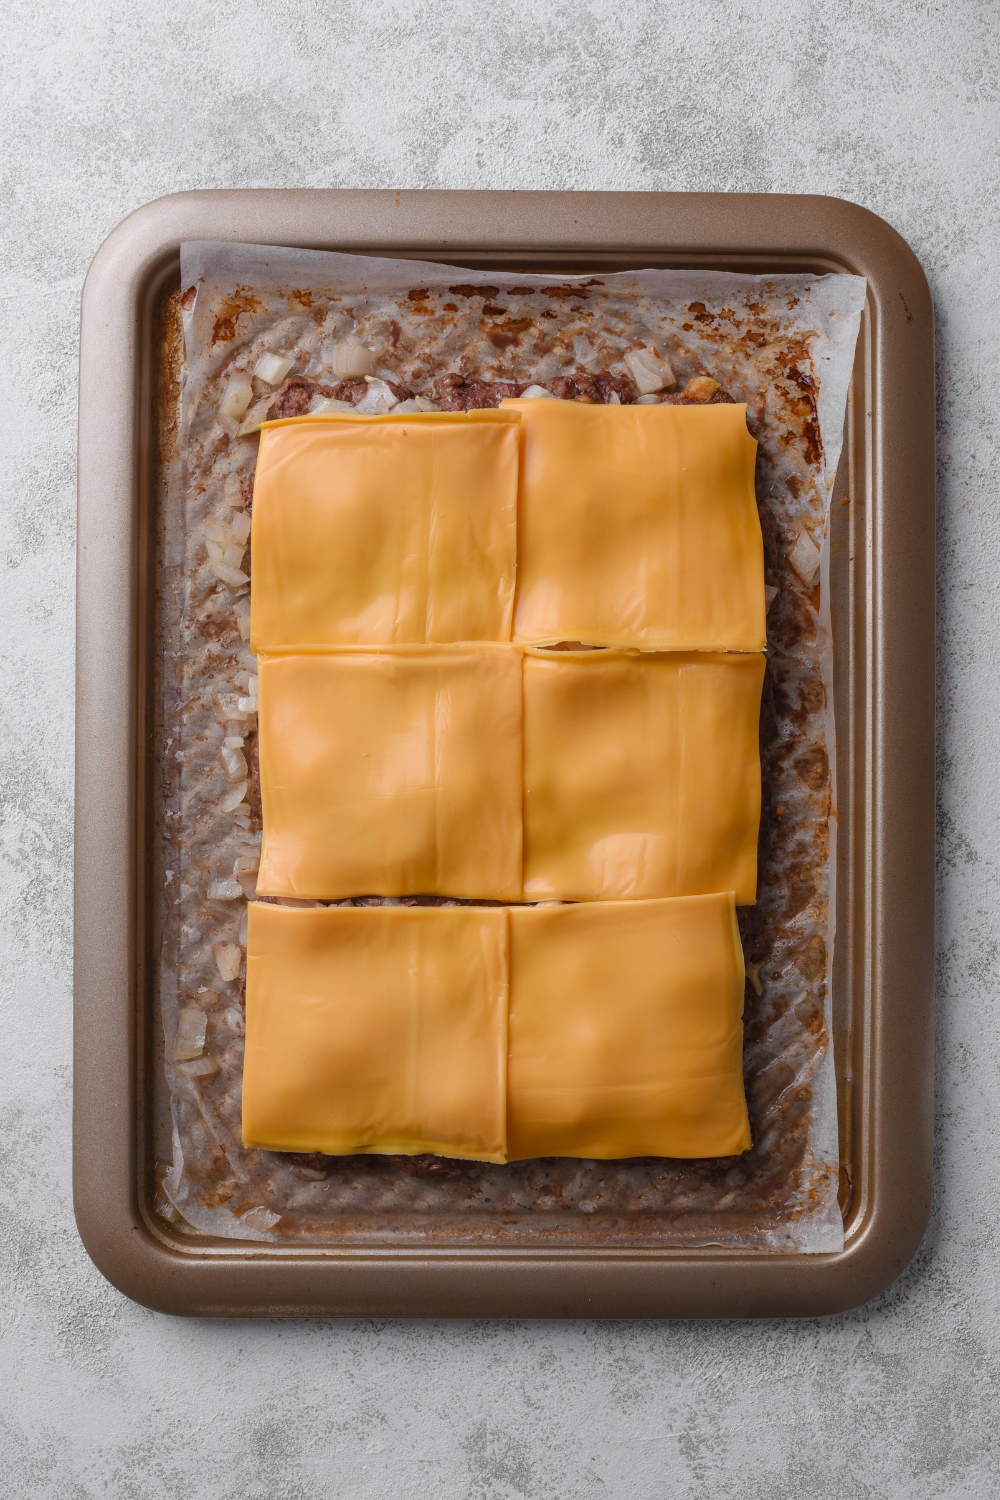 Six slices of cheese cover the ground beef and onions on a parchment paper lined baking tray.